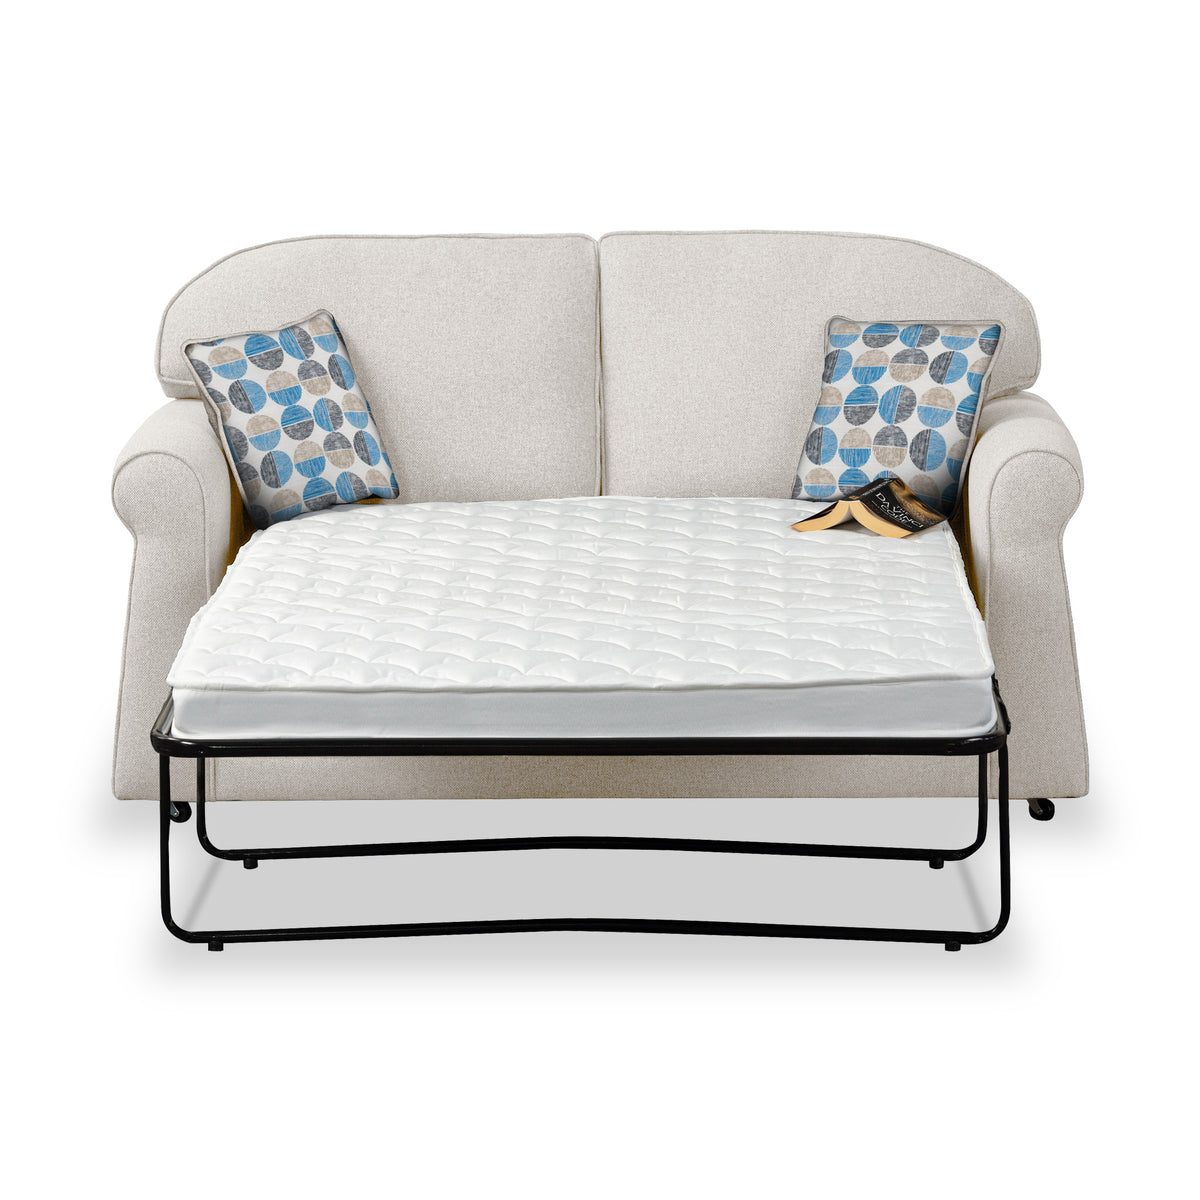 Giselle Oatmeal Soft Weave 2 Seater Sofabed with Blue Scatter Cushions from Roseland Furniture